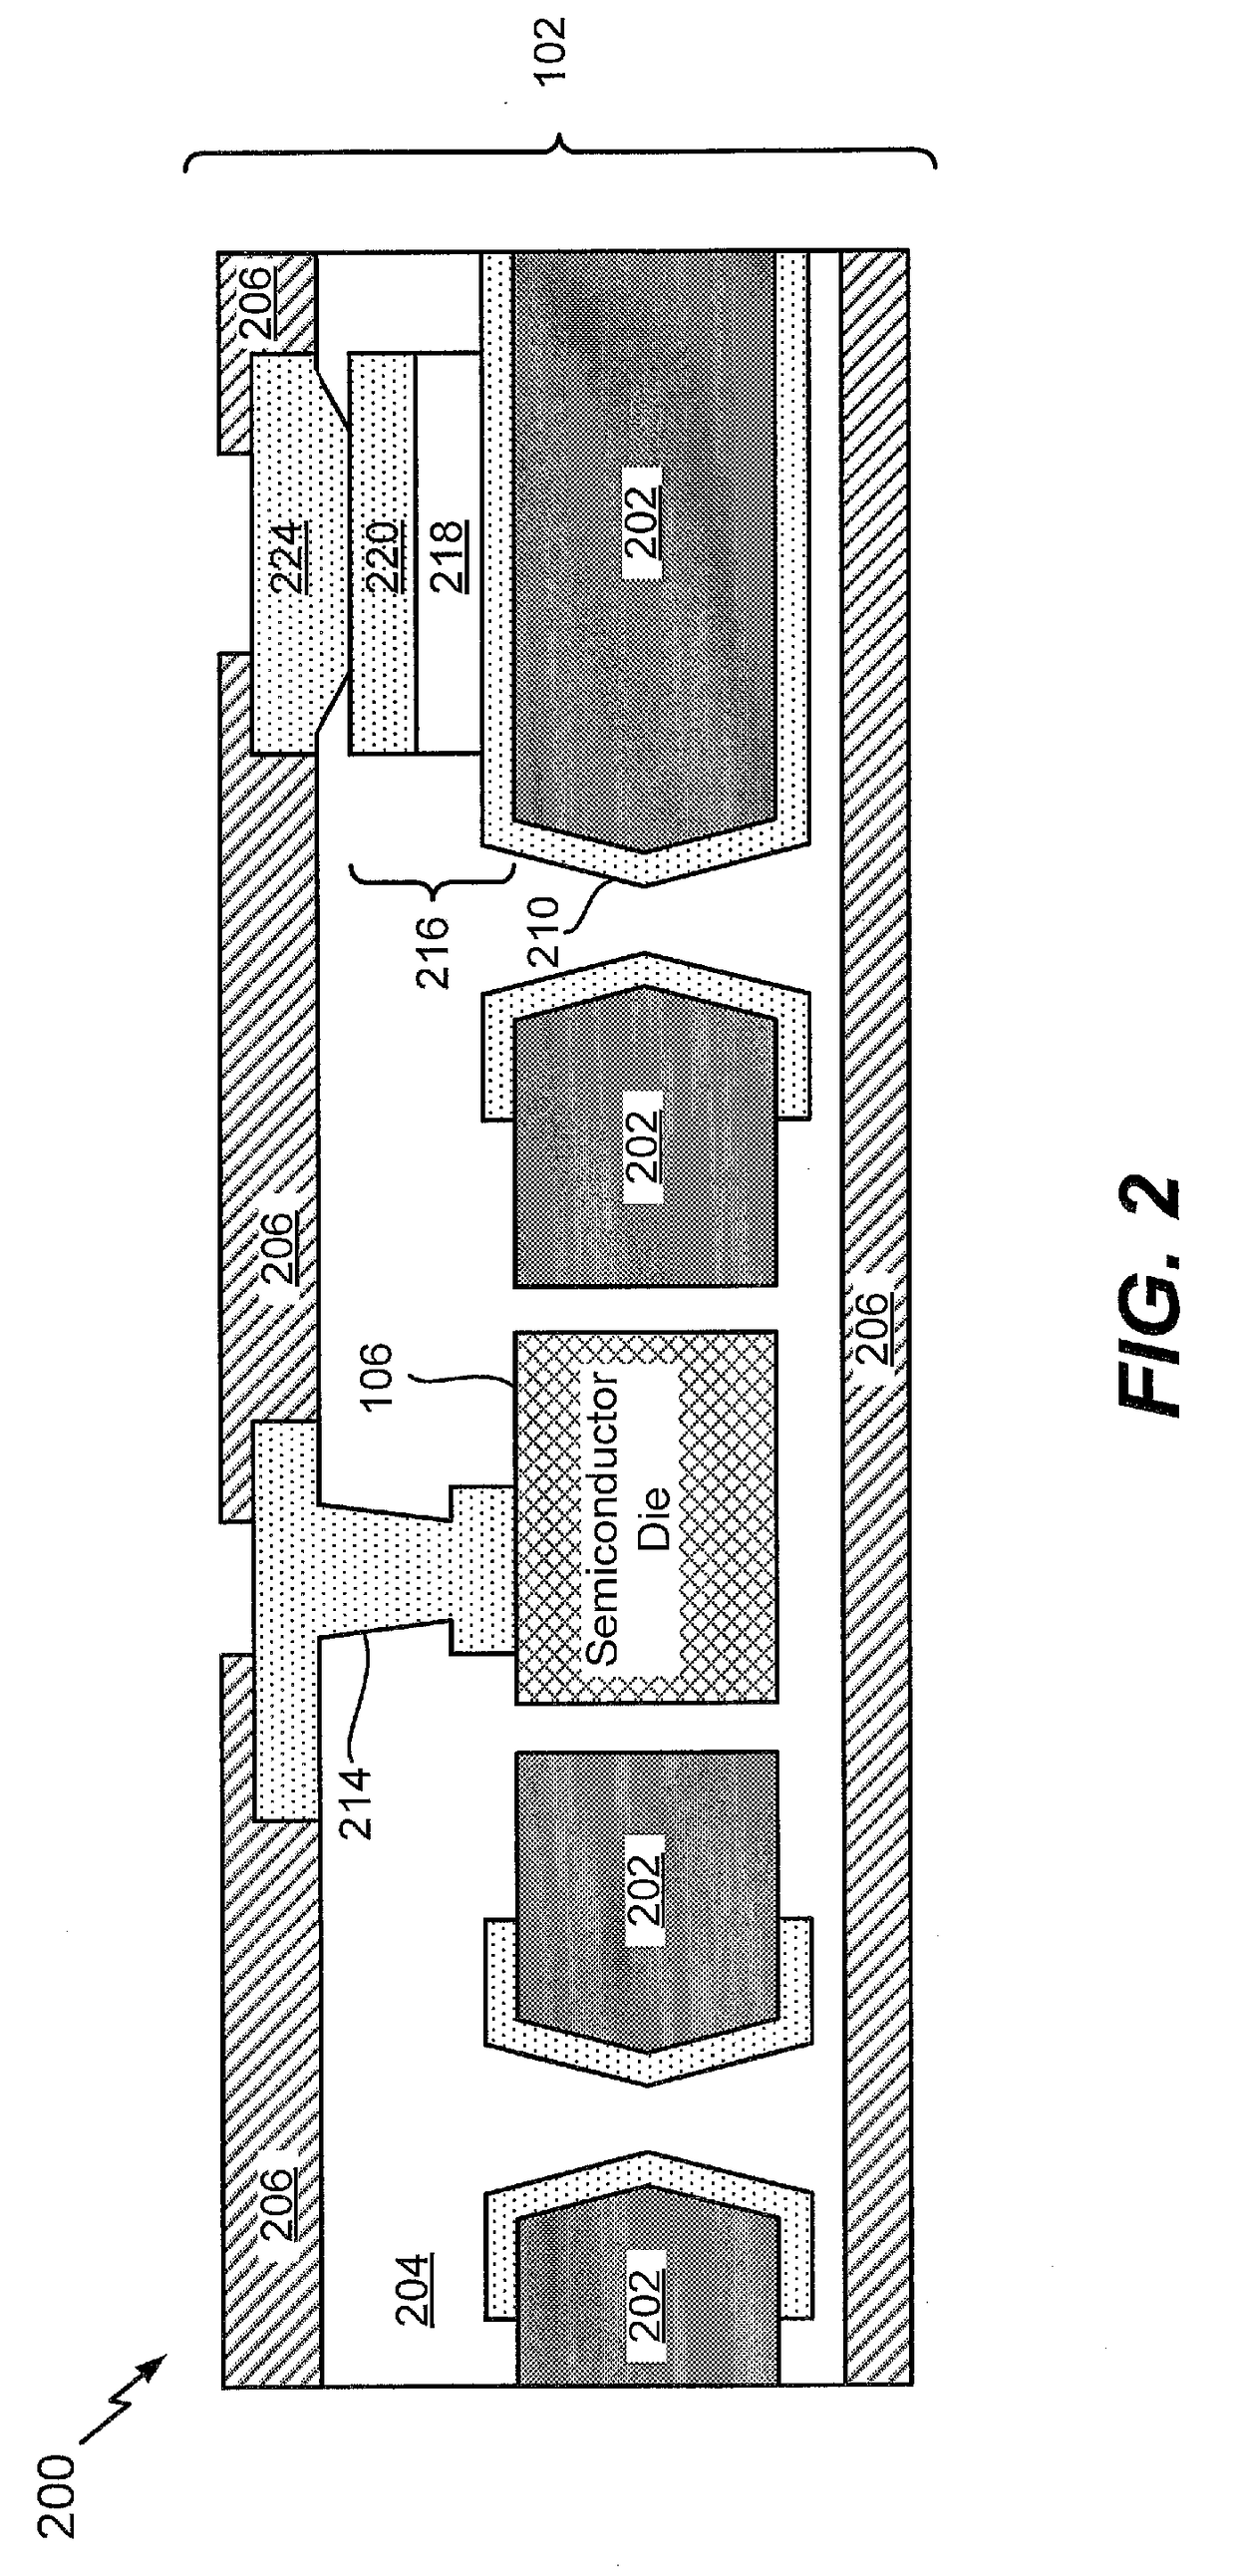 Glass substrate including passive-on-glass device and semiconductor die